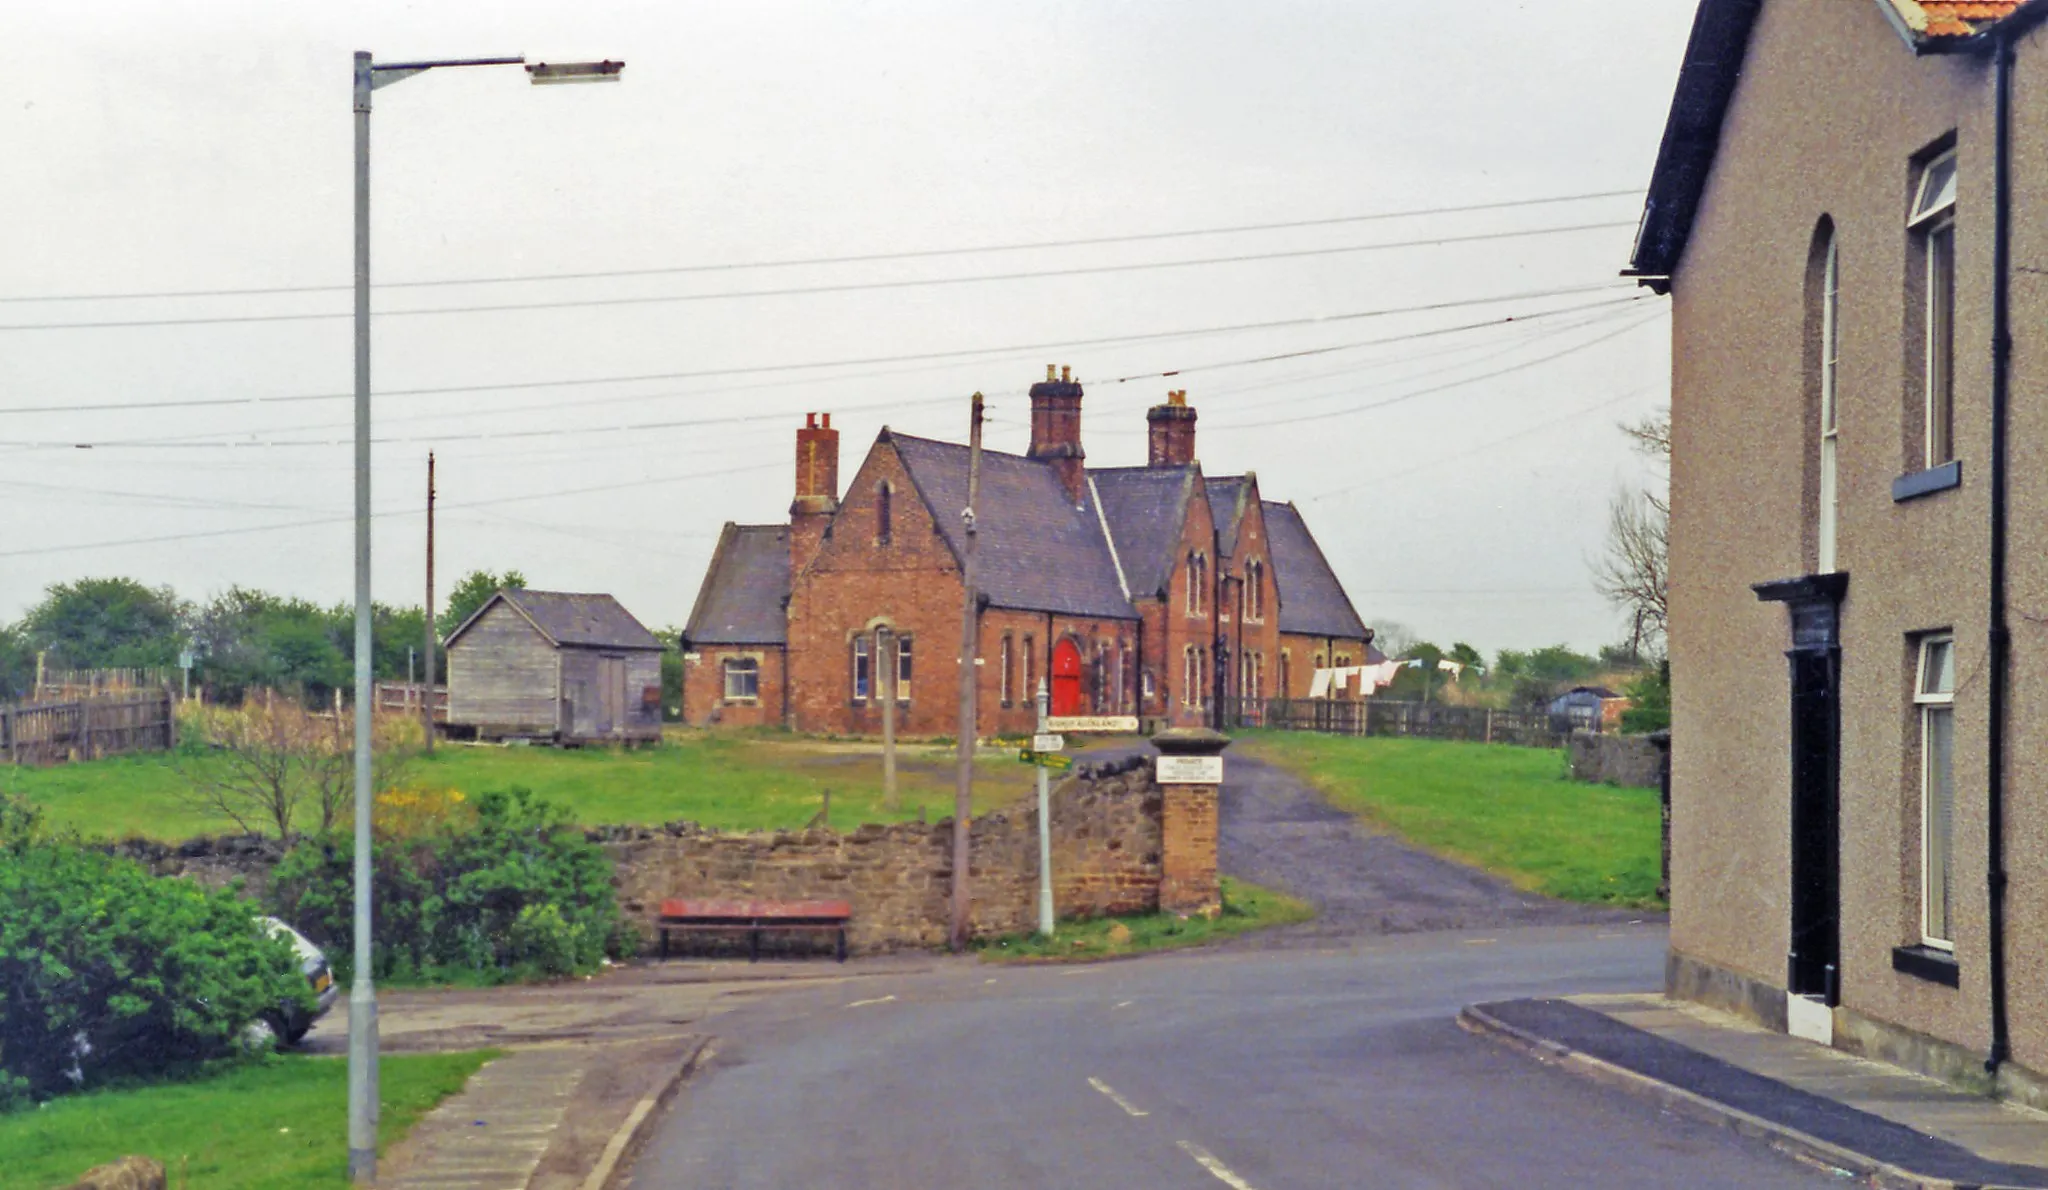 Photo showing: Etherley: former station, 1995.
View NE, towards Bishop Auckland: ex-NE lines west and north from Bishop Auckland to:- Wearhead (closed (passengers) 29/6/53, goods later, until 1994 to Eastgate), Tow Law (closed 11/6/56, to Crook (8/3/65, goods 1/11/65). The station has been reopened occasionally since 1991 as 'Witton Park' for excursions, but is not available yet on the heritage Weardale Railway which passes through.